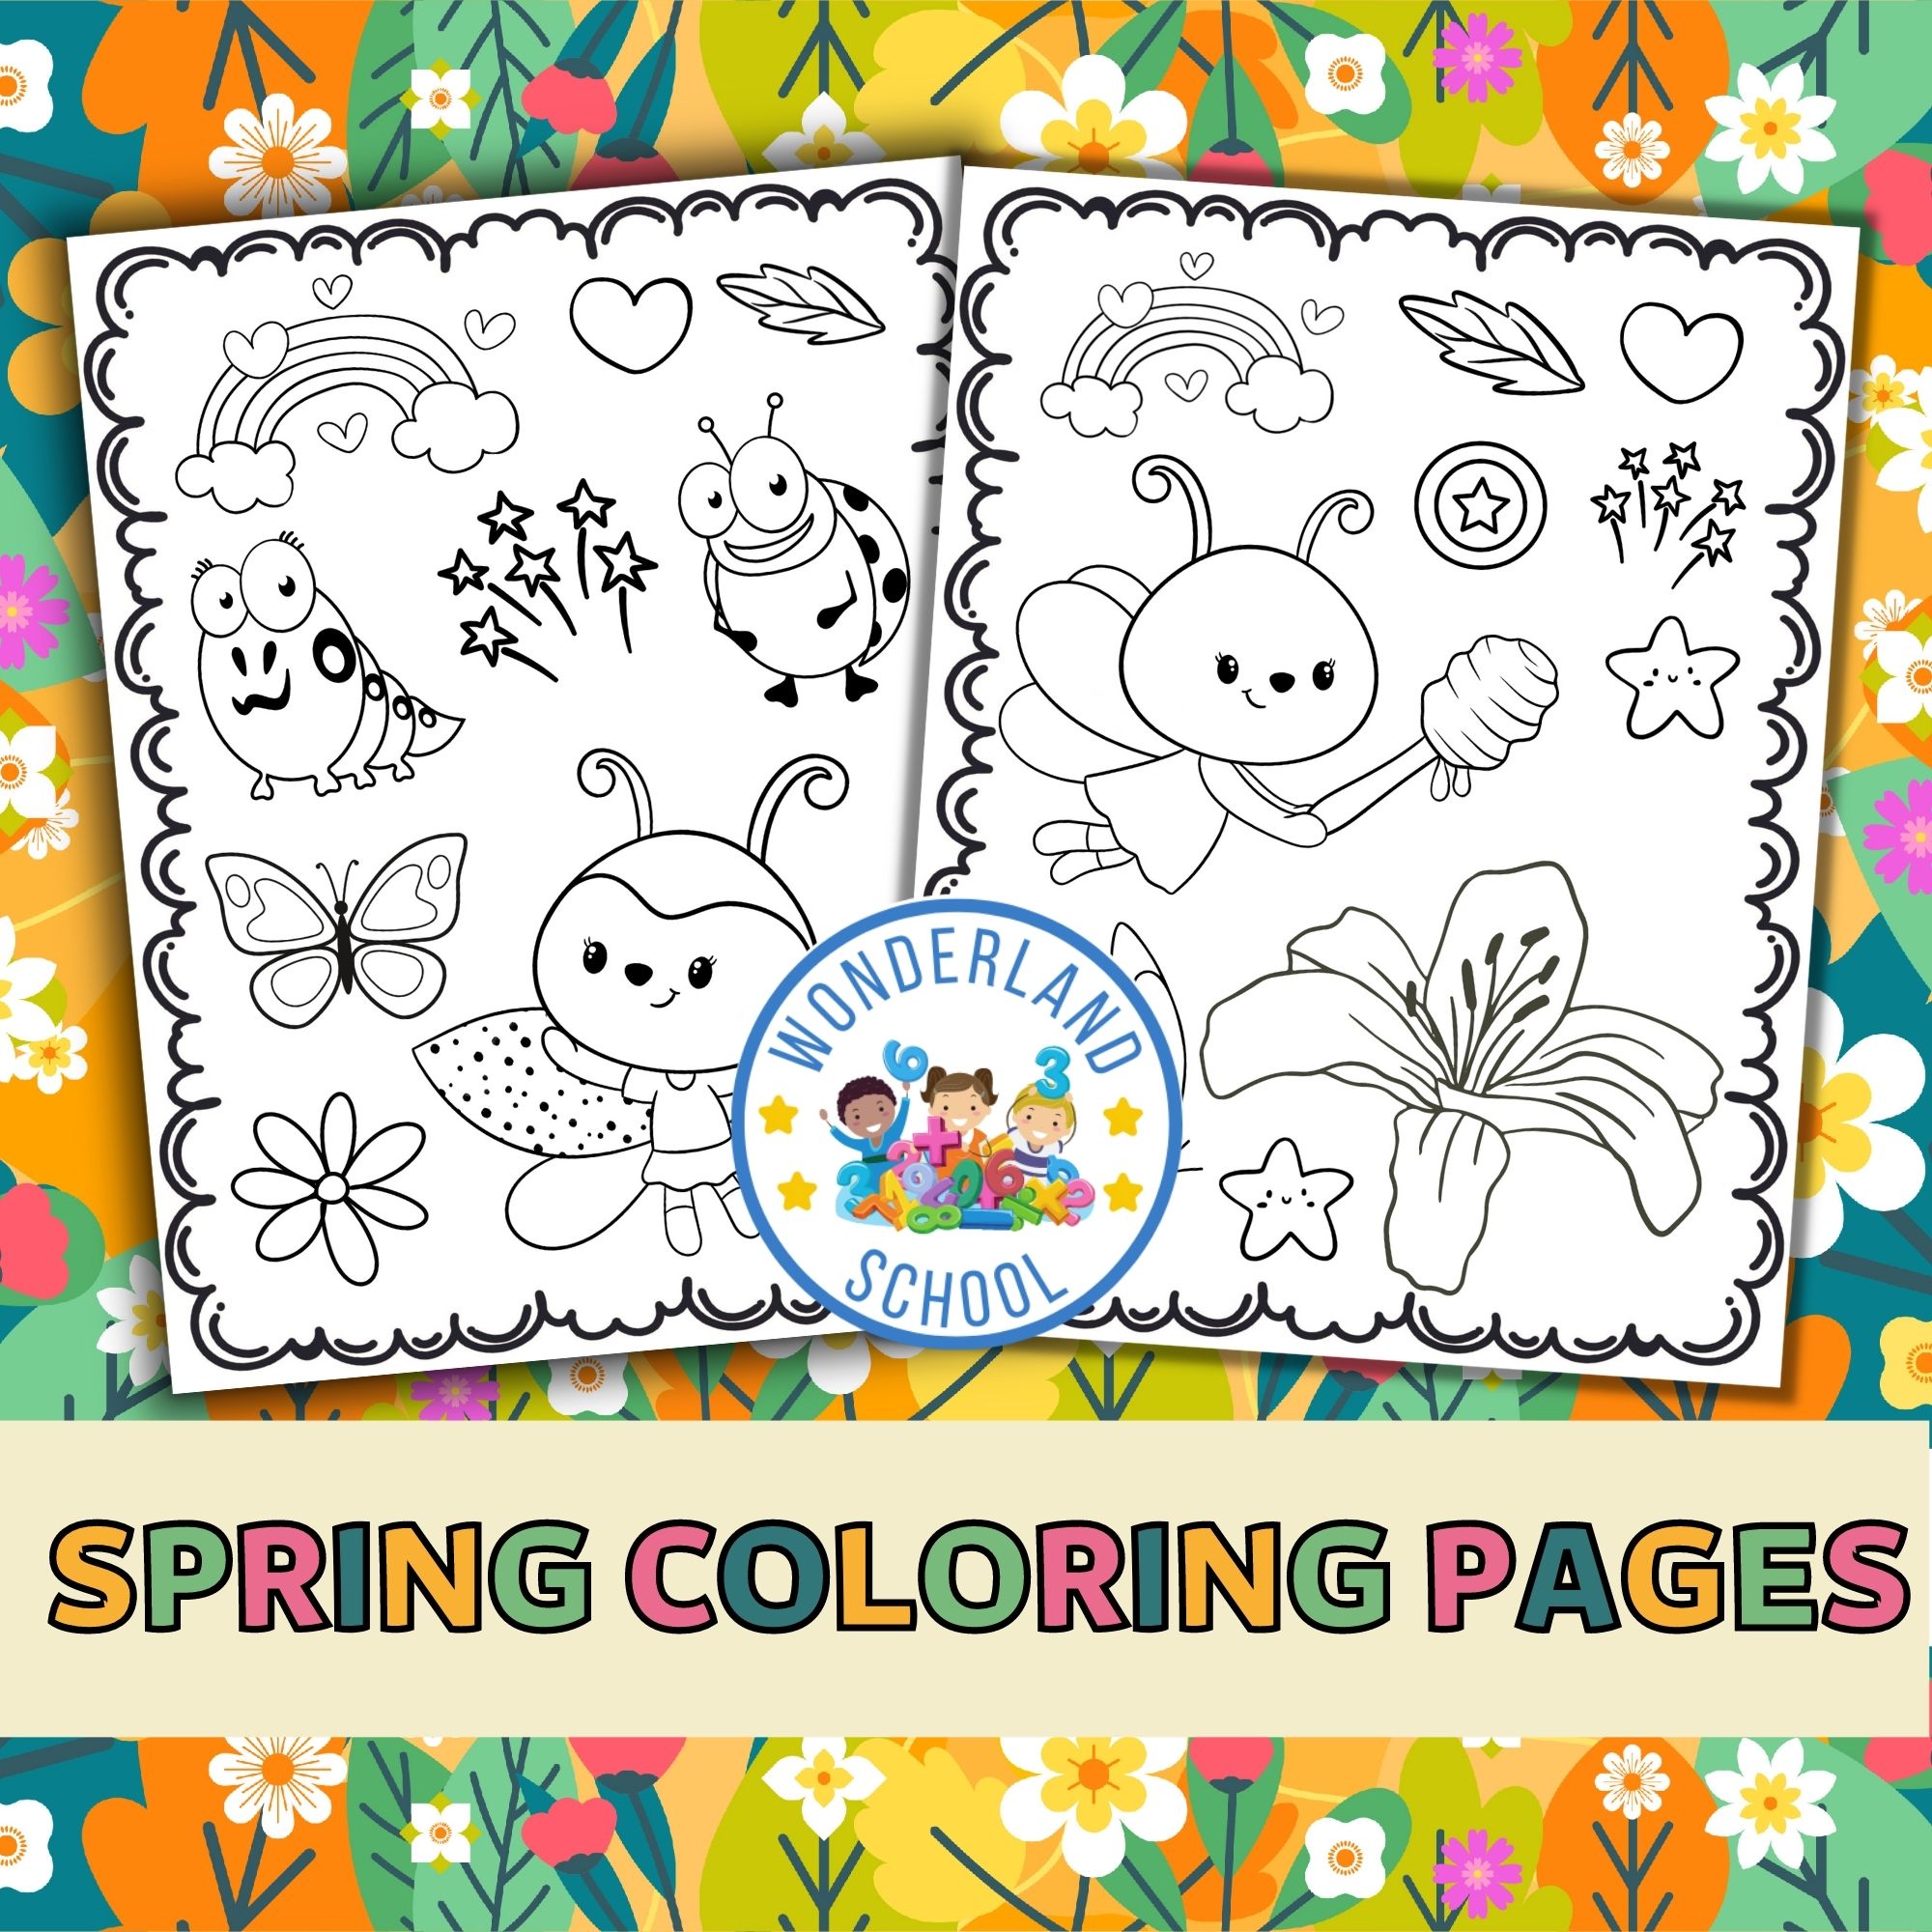 Spring coloring pages outdoor activities coloring pages spring holiday made by teachers